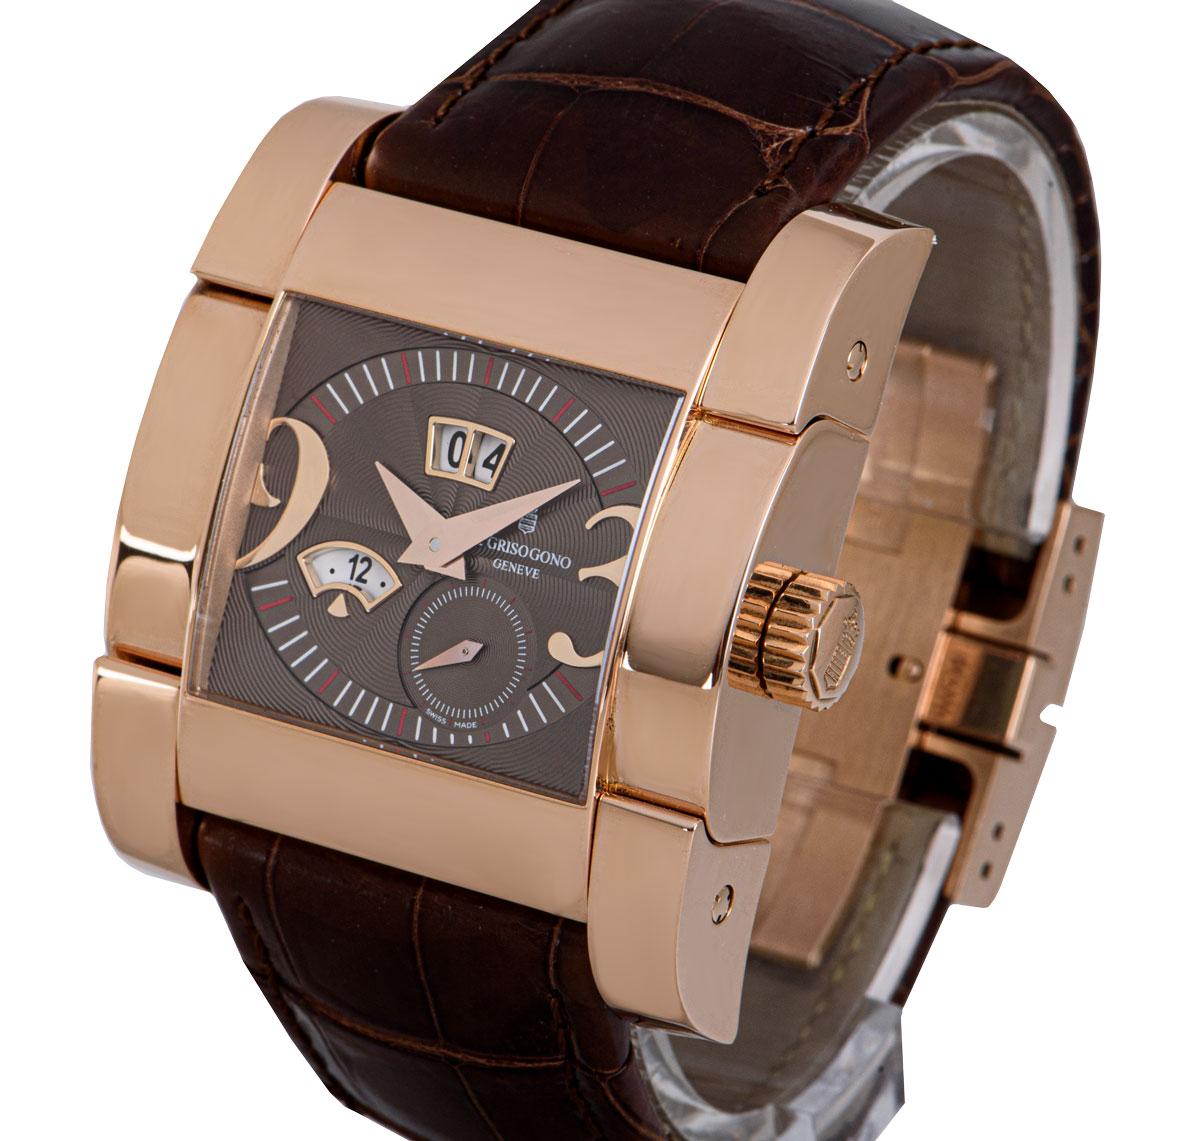 A 40 mm 18k Rose Gold Instrumento Novantatre Gents Wristwatch, brown dial with hour markers and applied arabic numbers 3 and 9, small seconds at 5 0'clock, month at 8 0'clock, date at 12 0'clock, a fixed 18k rose gold bezel, an original brown